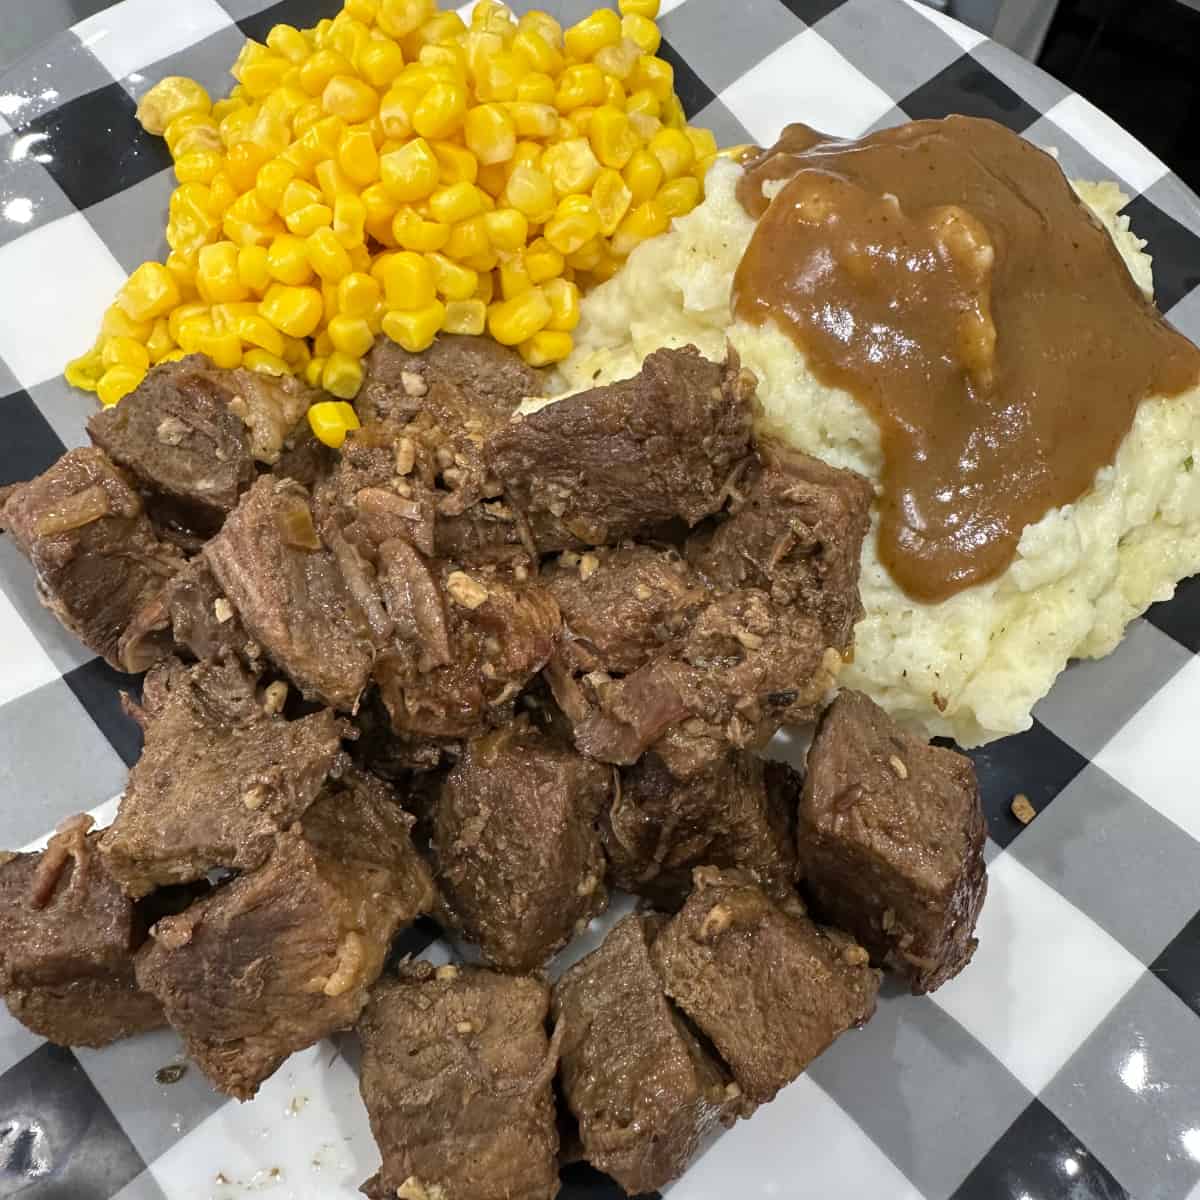 Crockpot Beef Tips Recipe and VIDEO